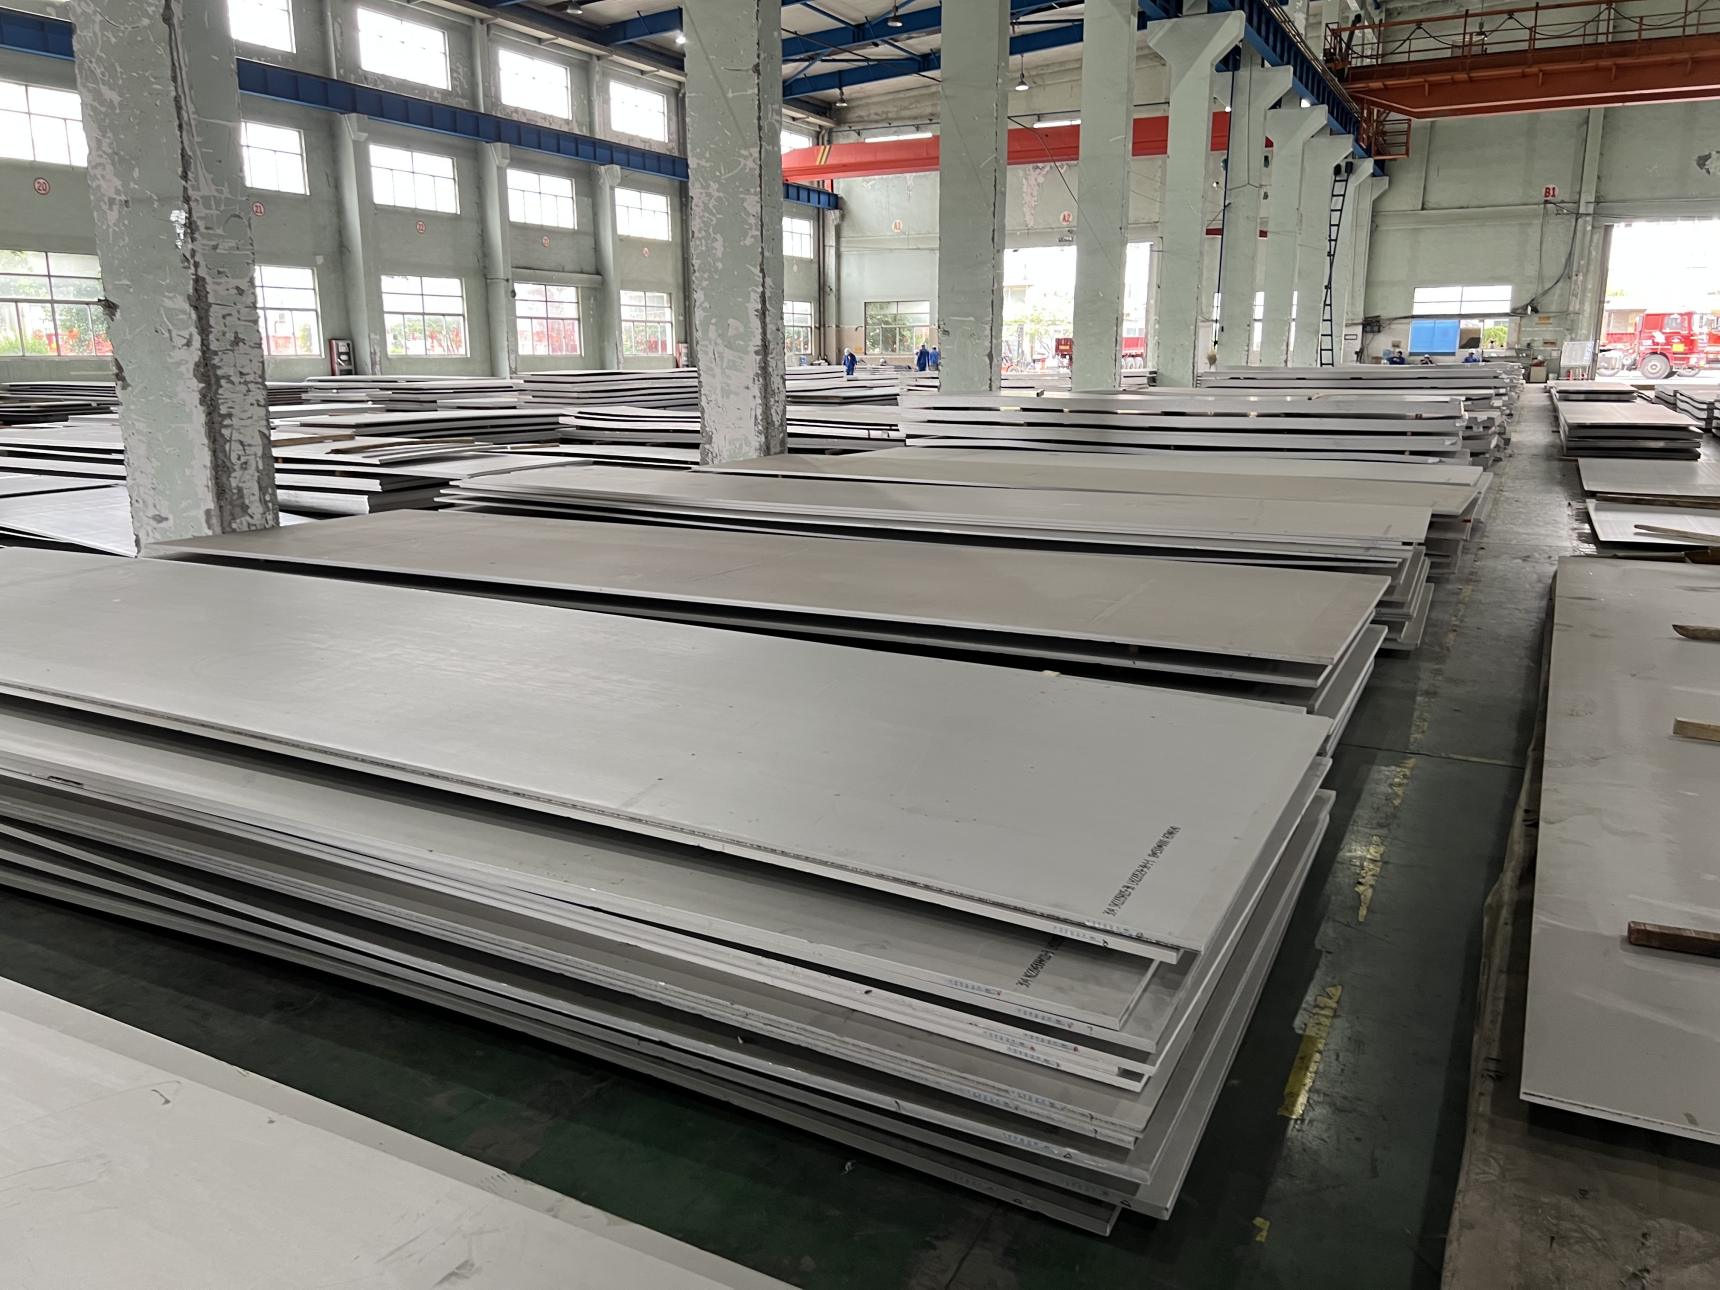 Tisco Cold Rolled Inox 1-8mm 201 202 304 304L 316 316L 309 310 410 420 430 904L 2205 2507 Stainless Steel Sheet